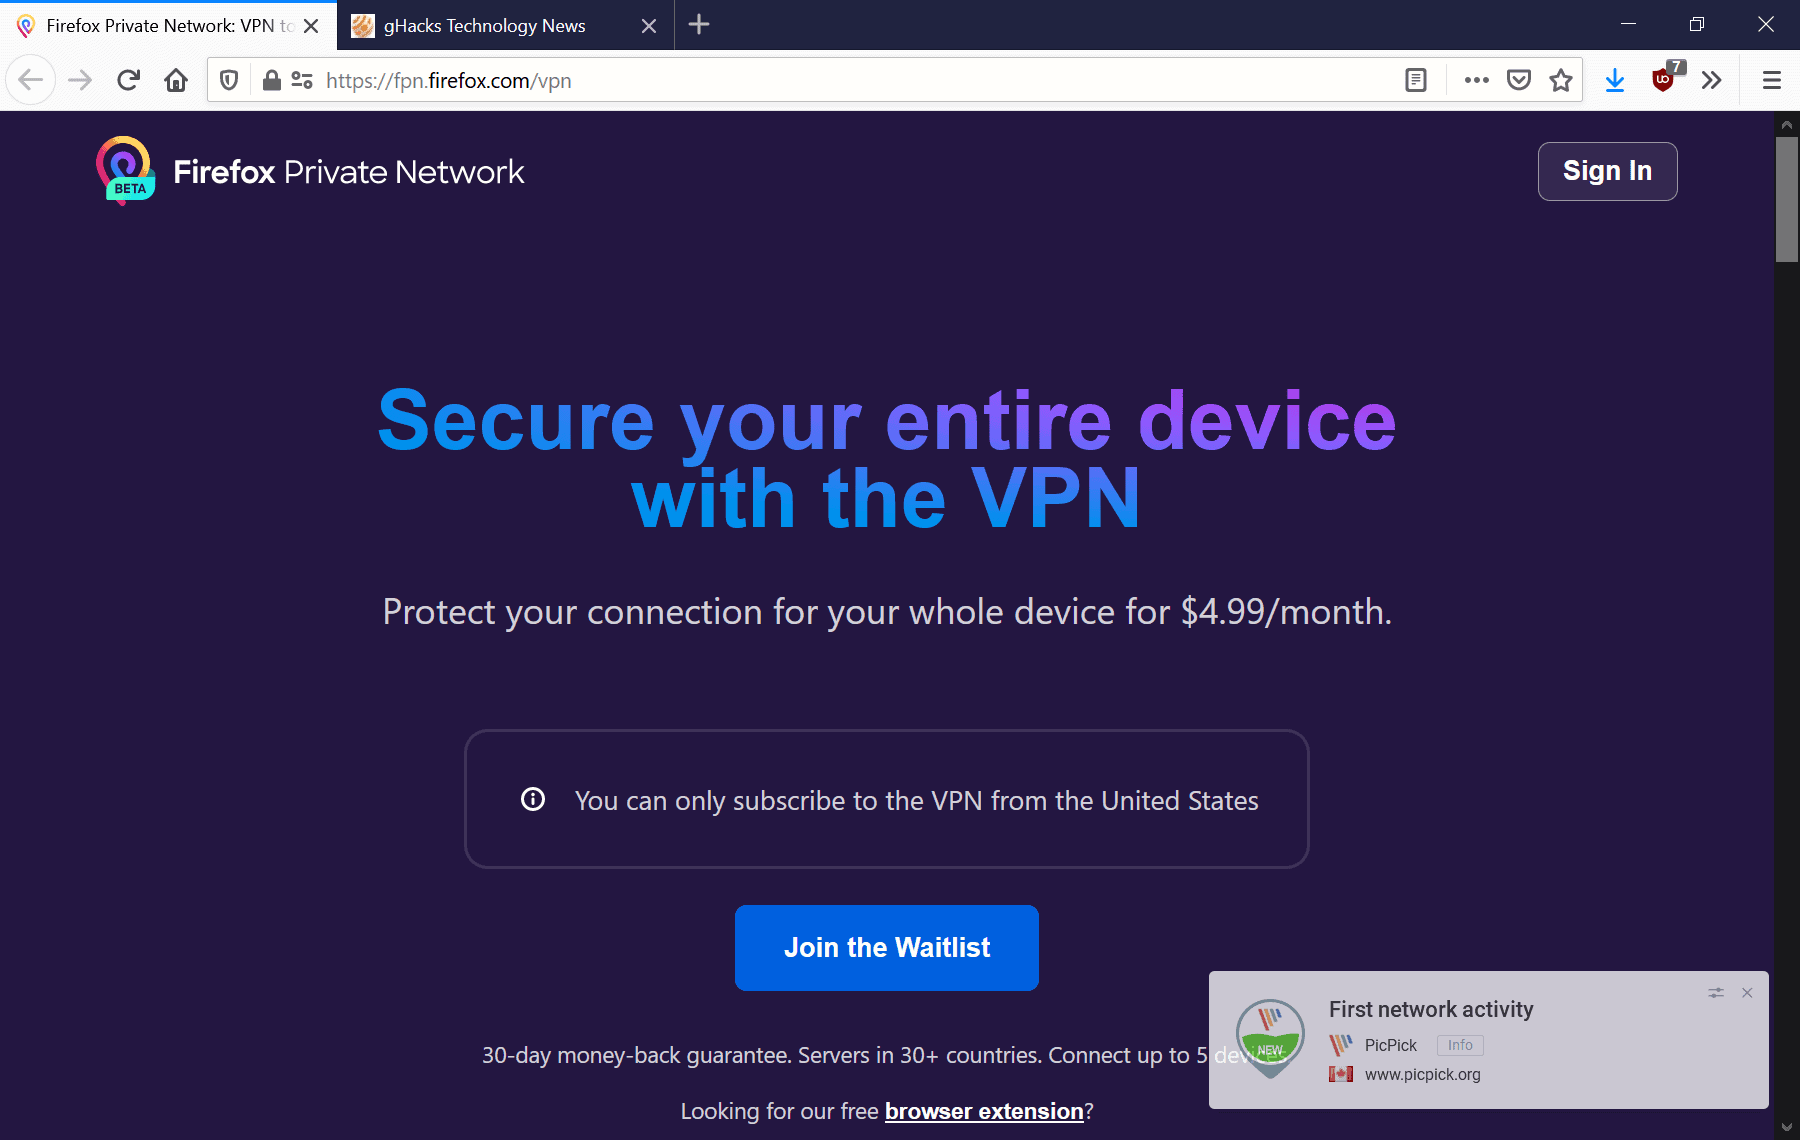 Mozilla VPN launches in some countries officially